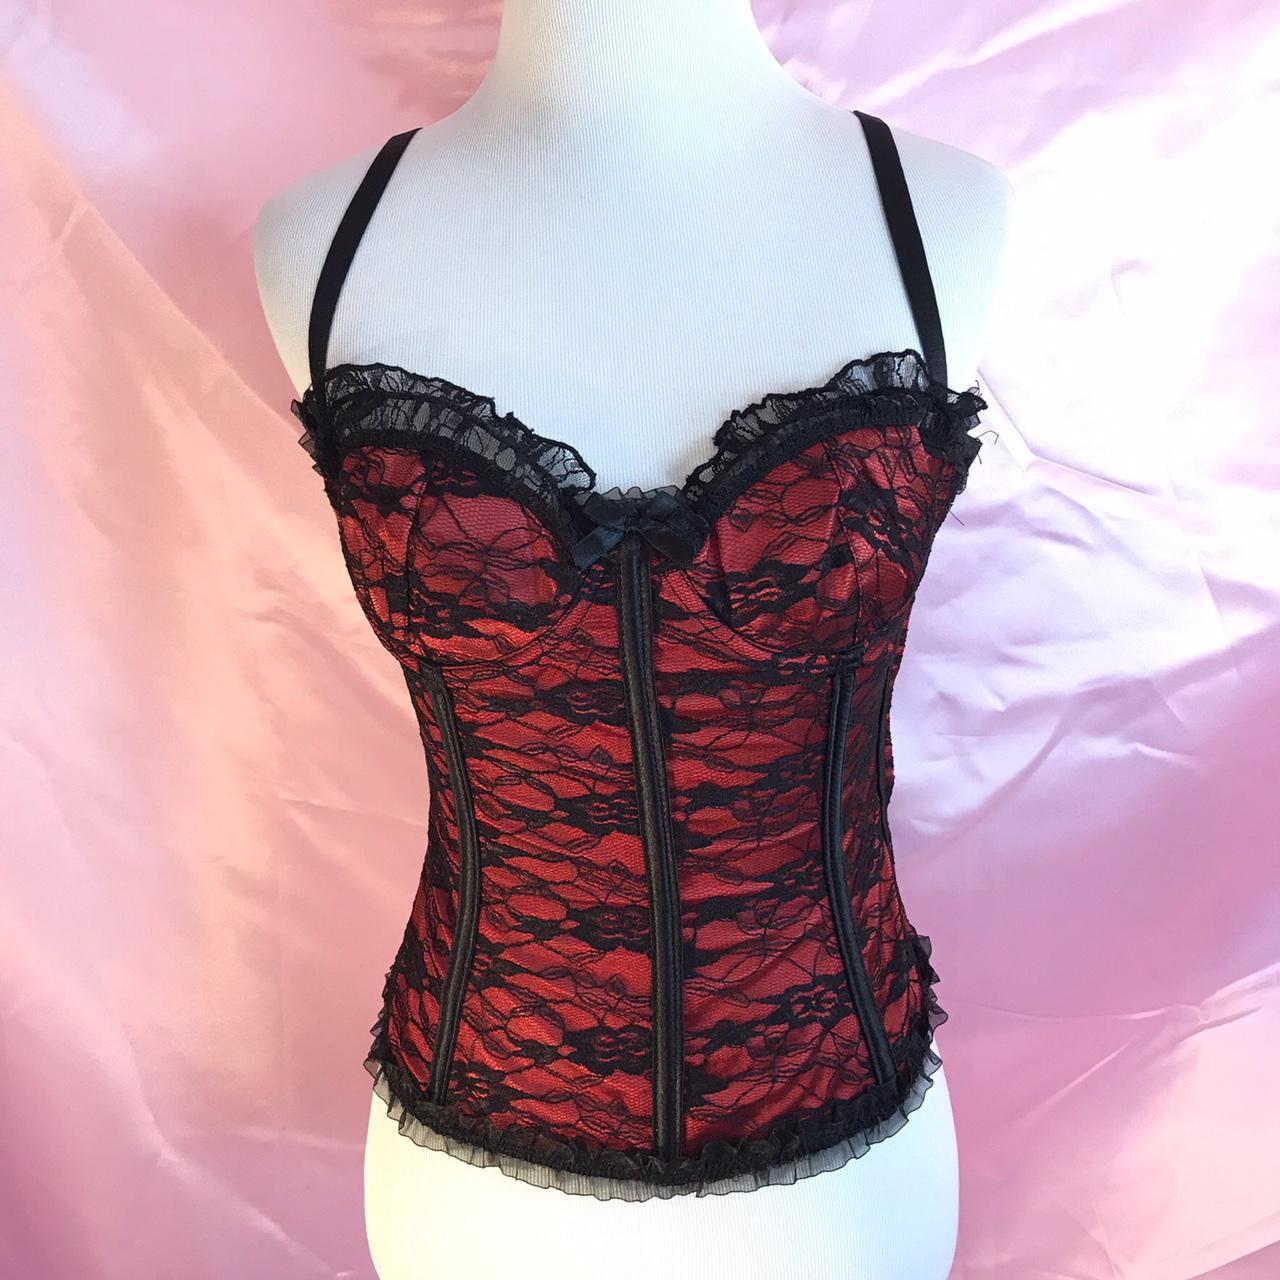 Elegant Moments Women's Black and Red Corset